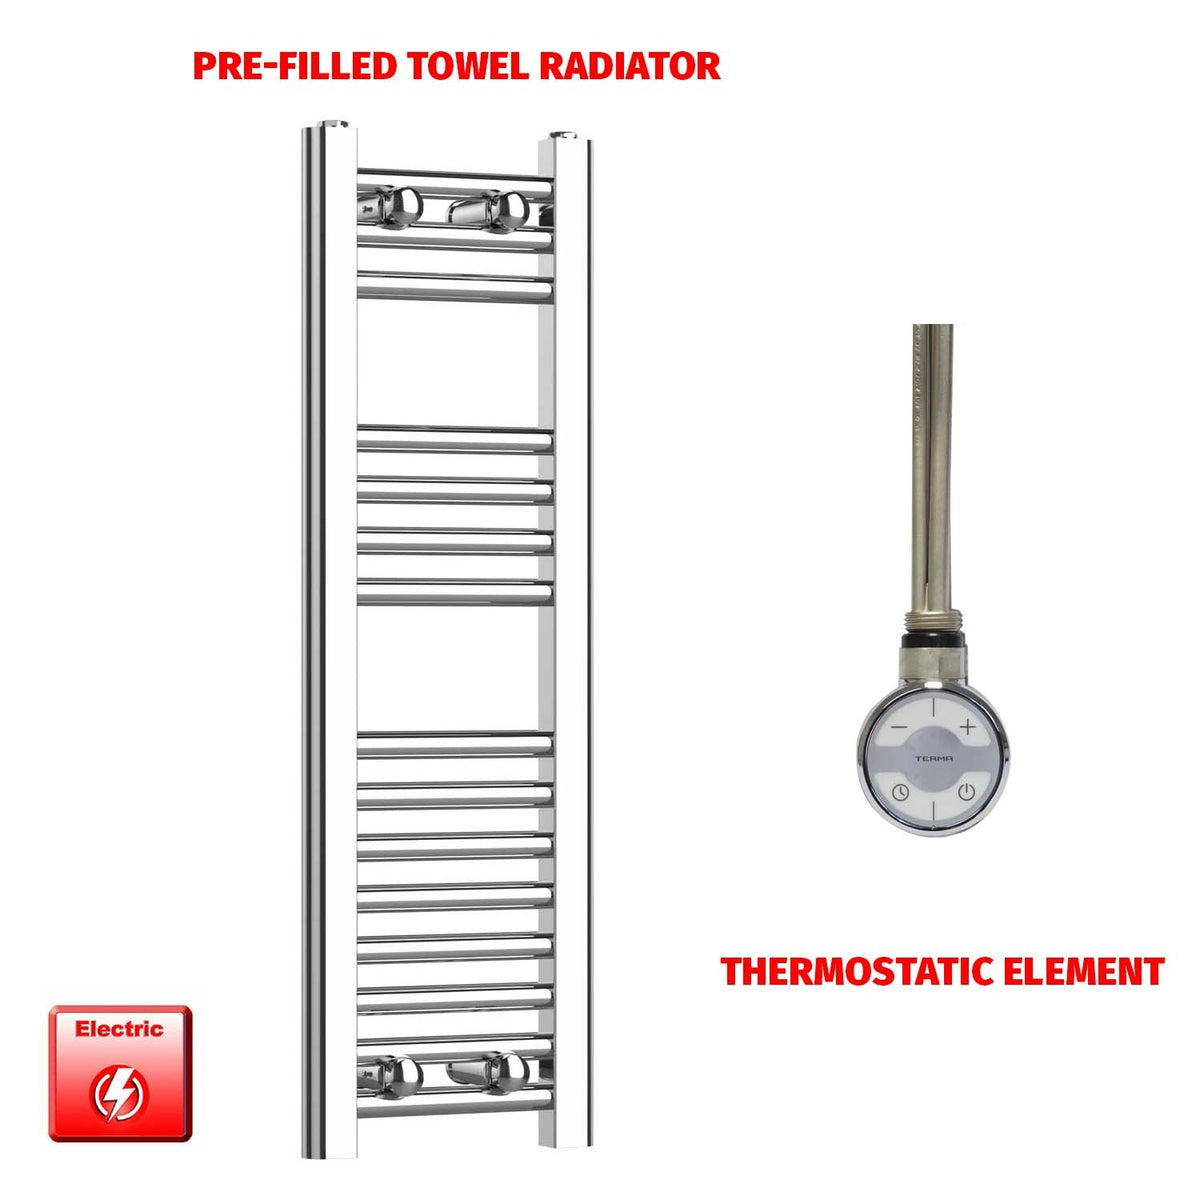 800 x 250 Pre-Filled Electric Heated Towel Radiator Straight Chrome MOA Element No Timer